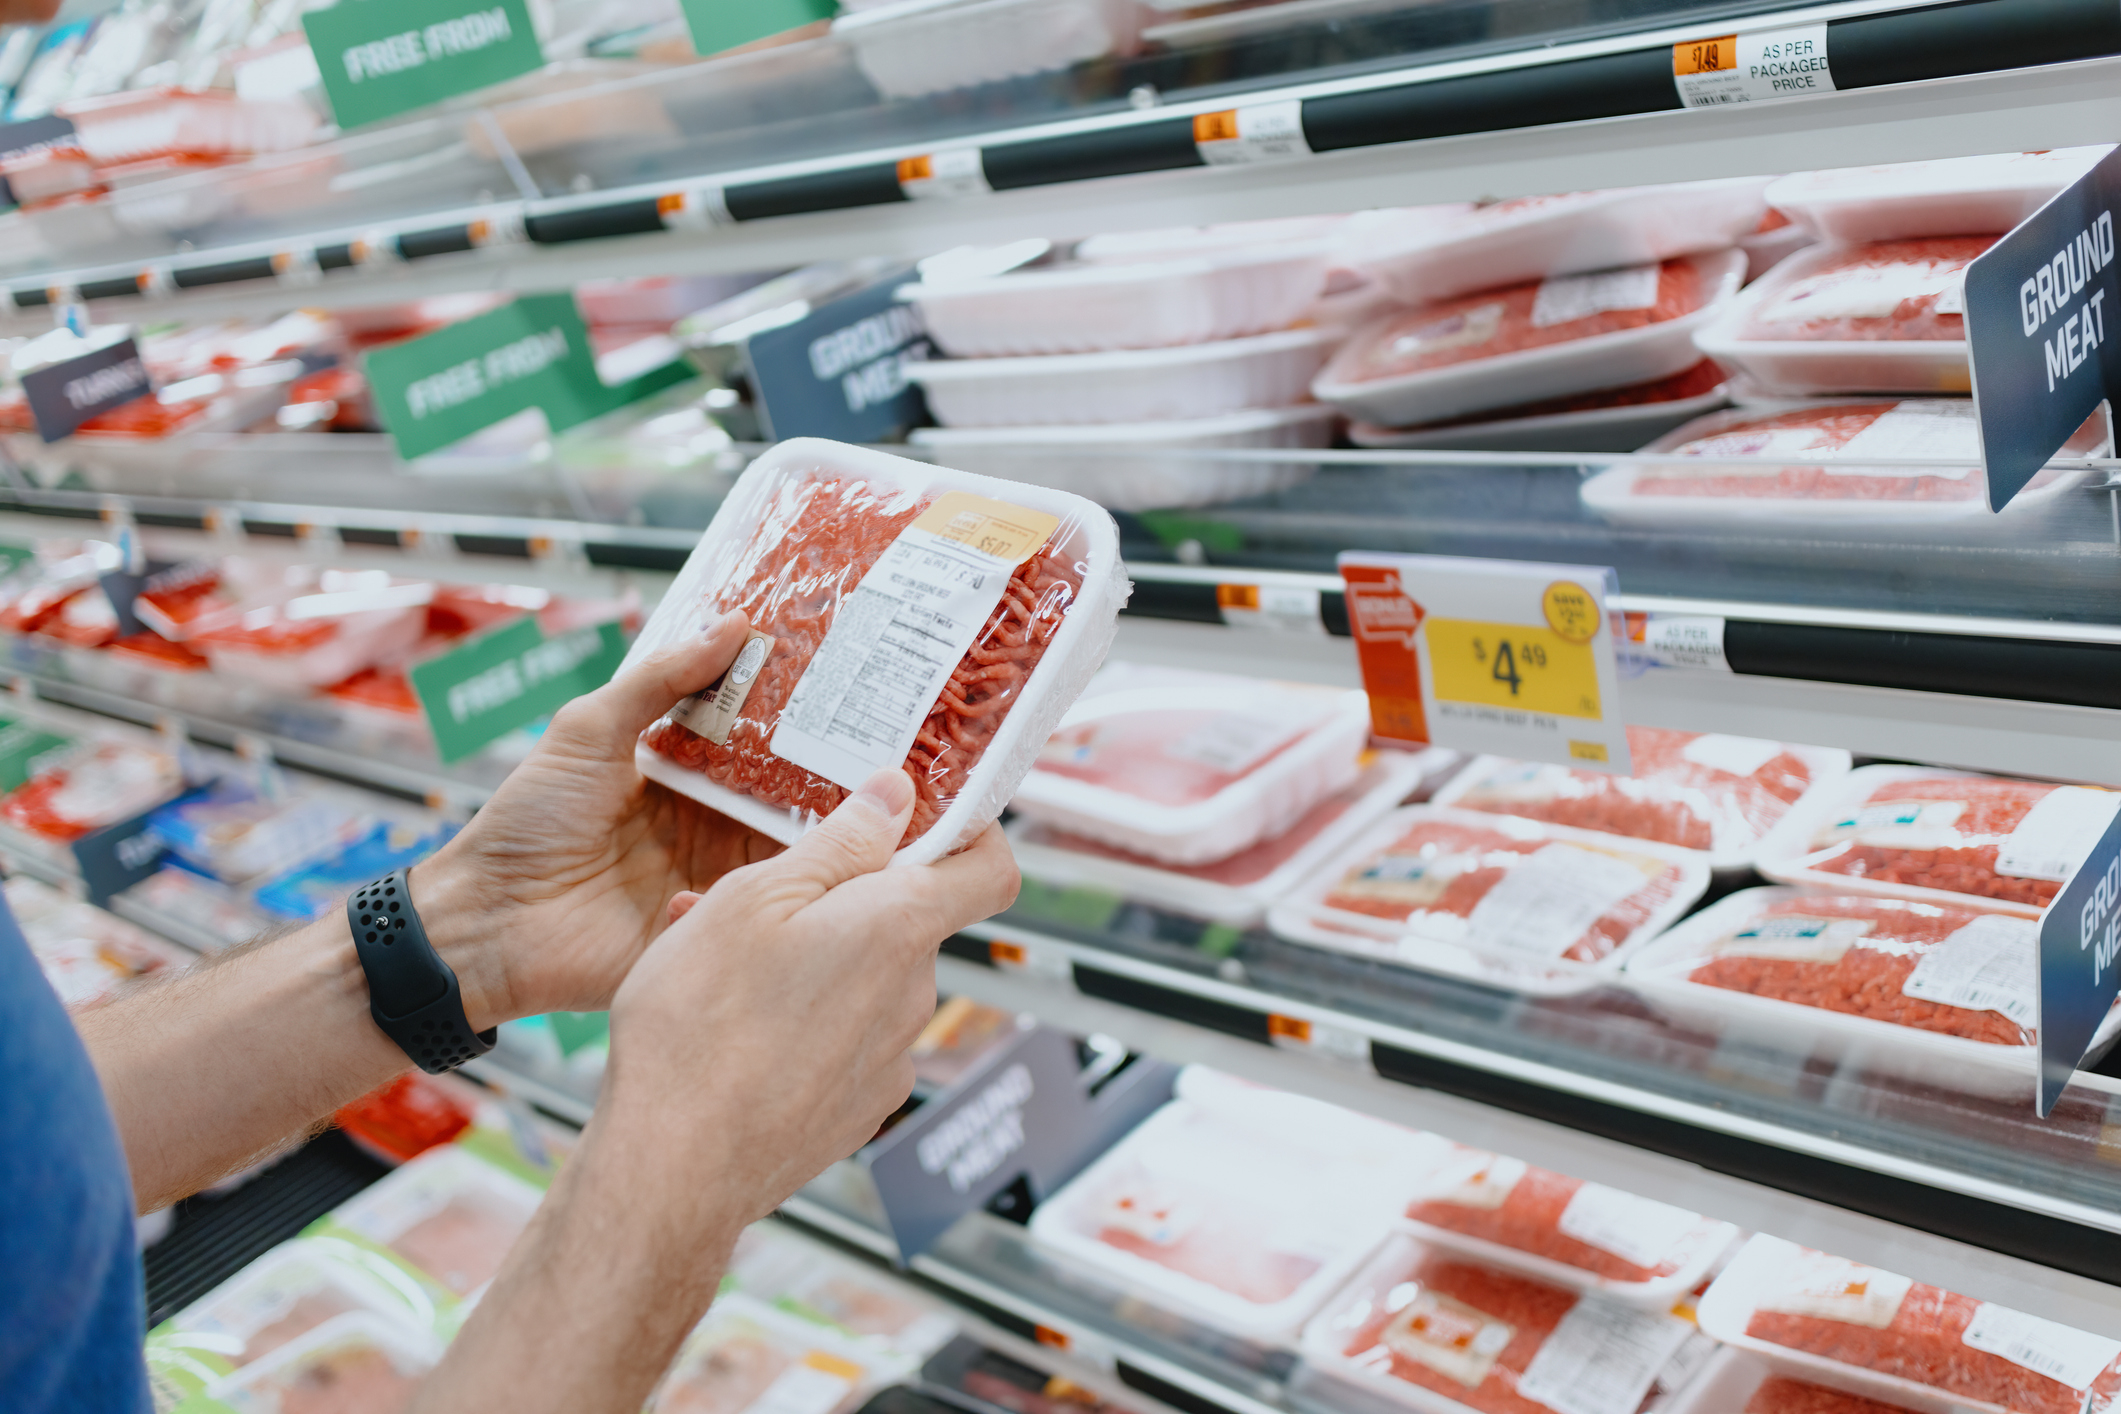 Person selecting packaged meat from a supermarket shelf with various meat products and price tags